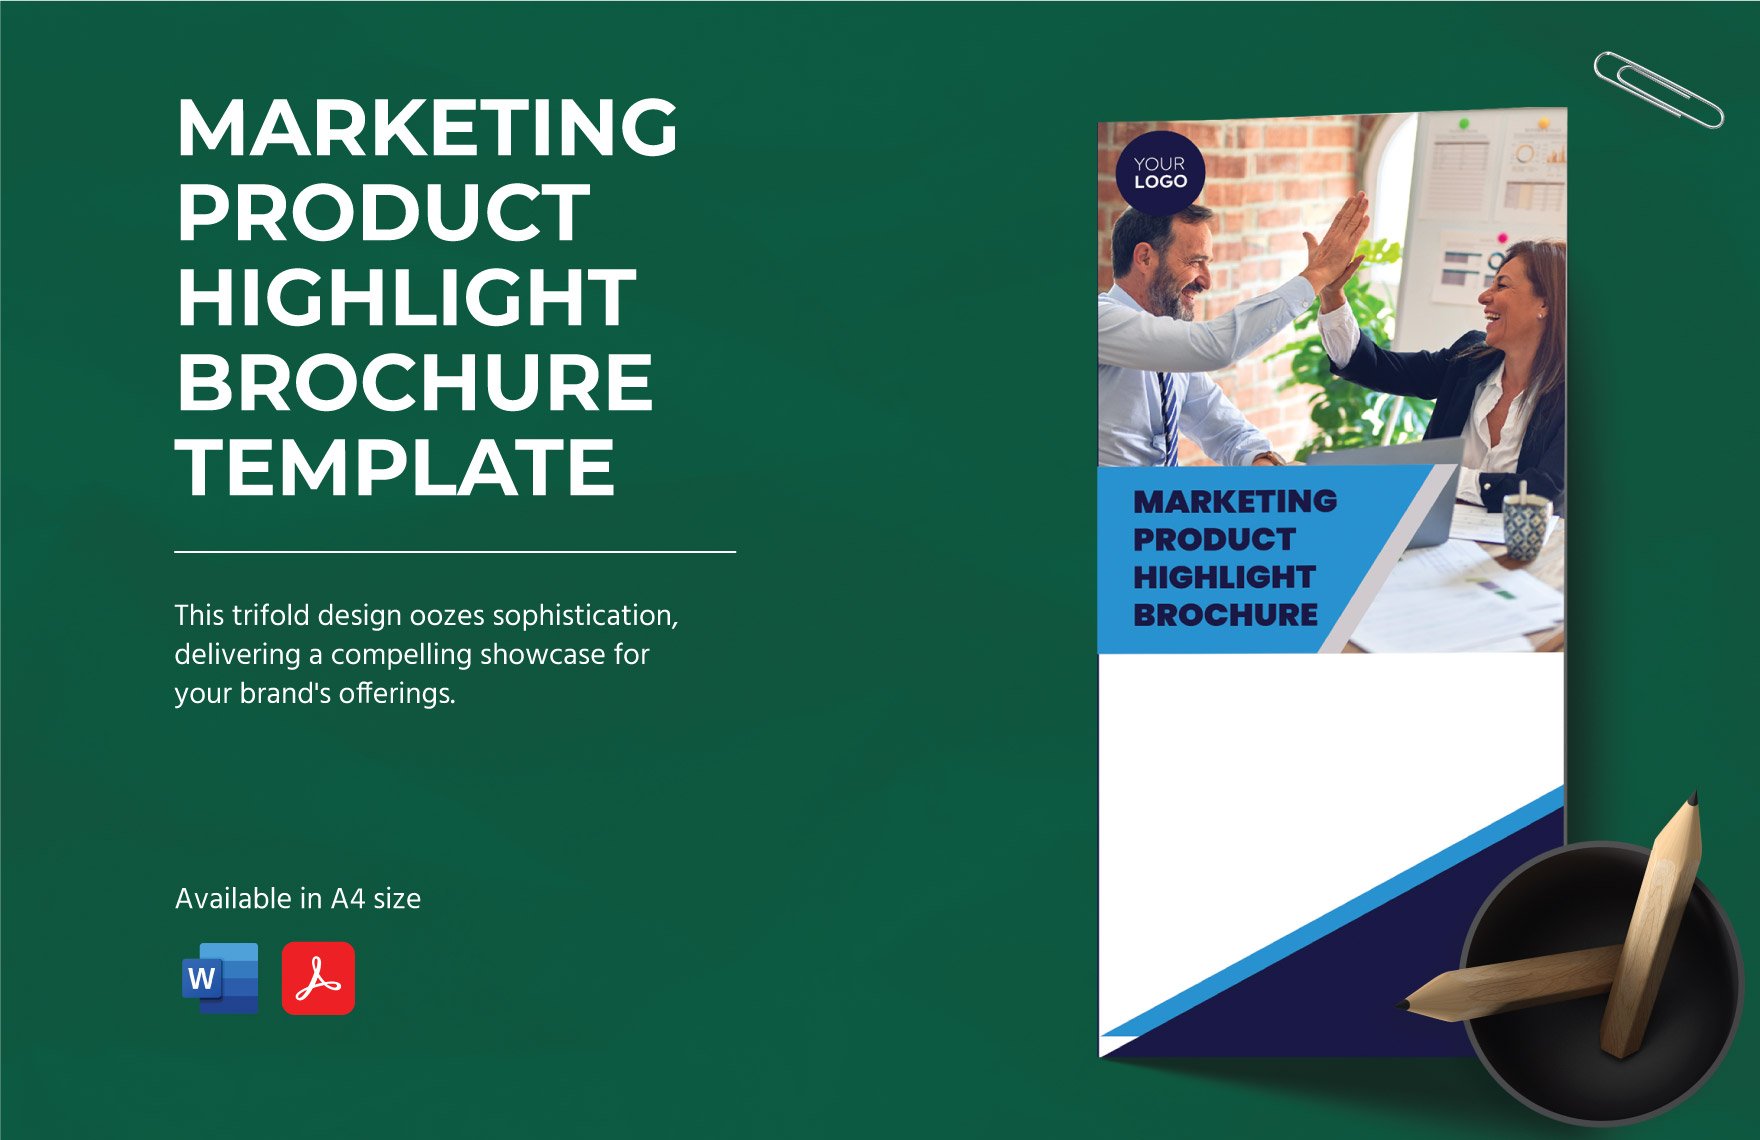 Marketing Product Highlight Brochure Template